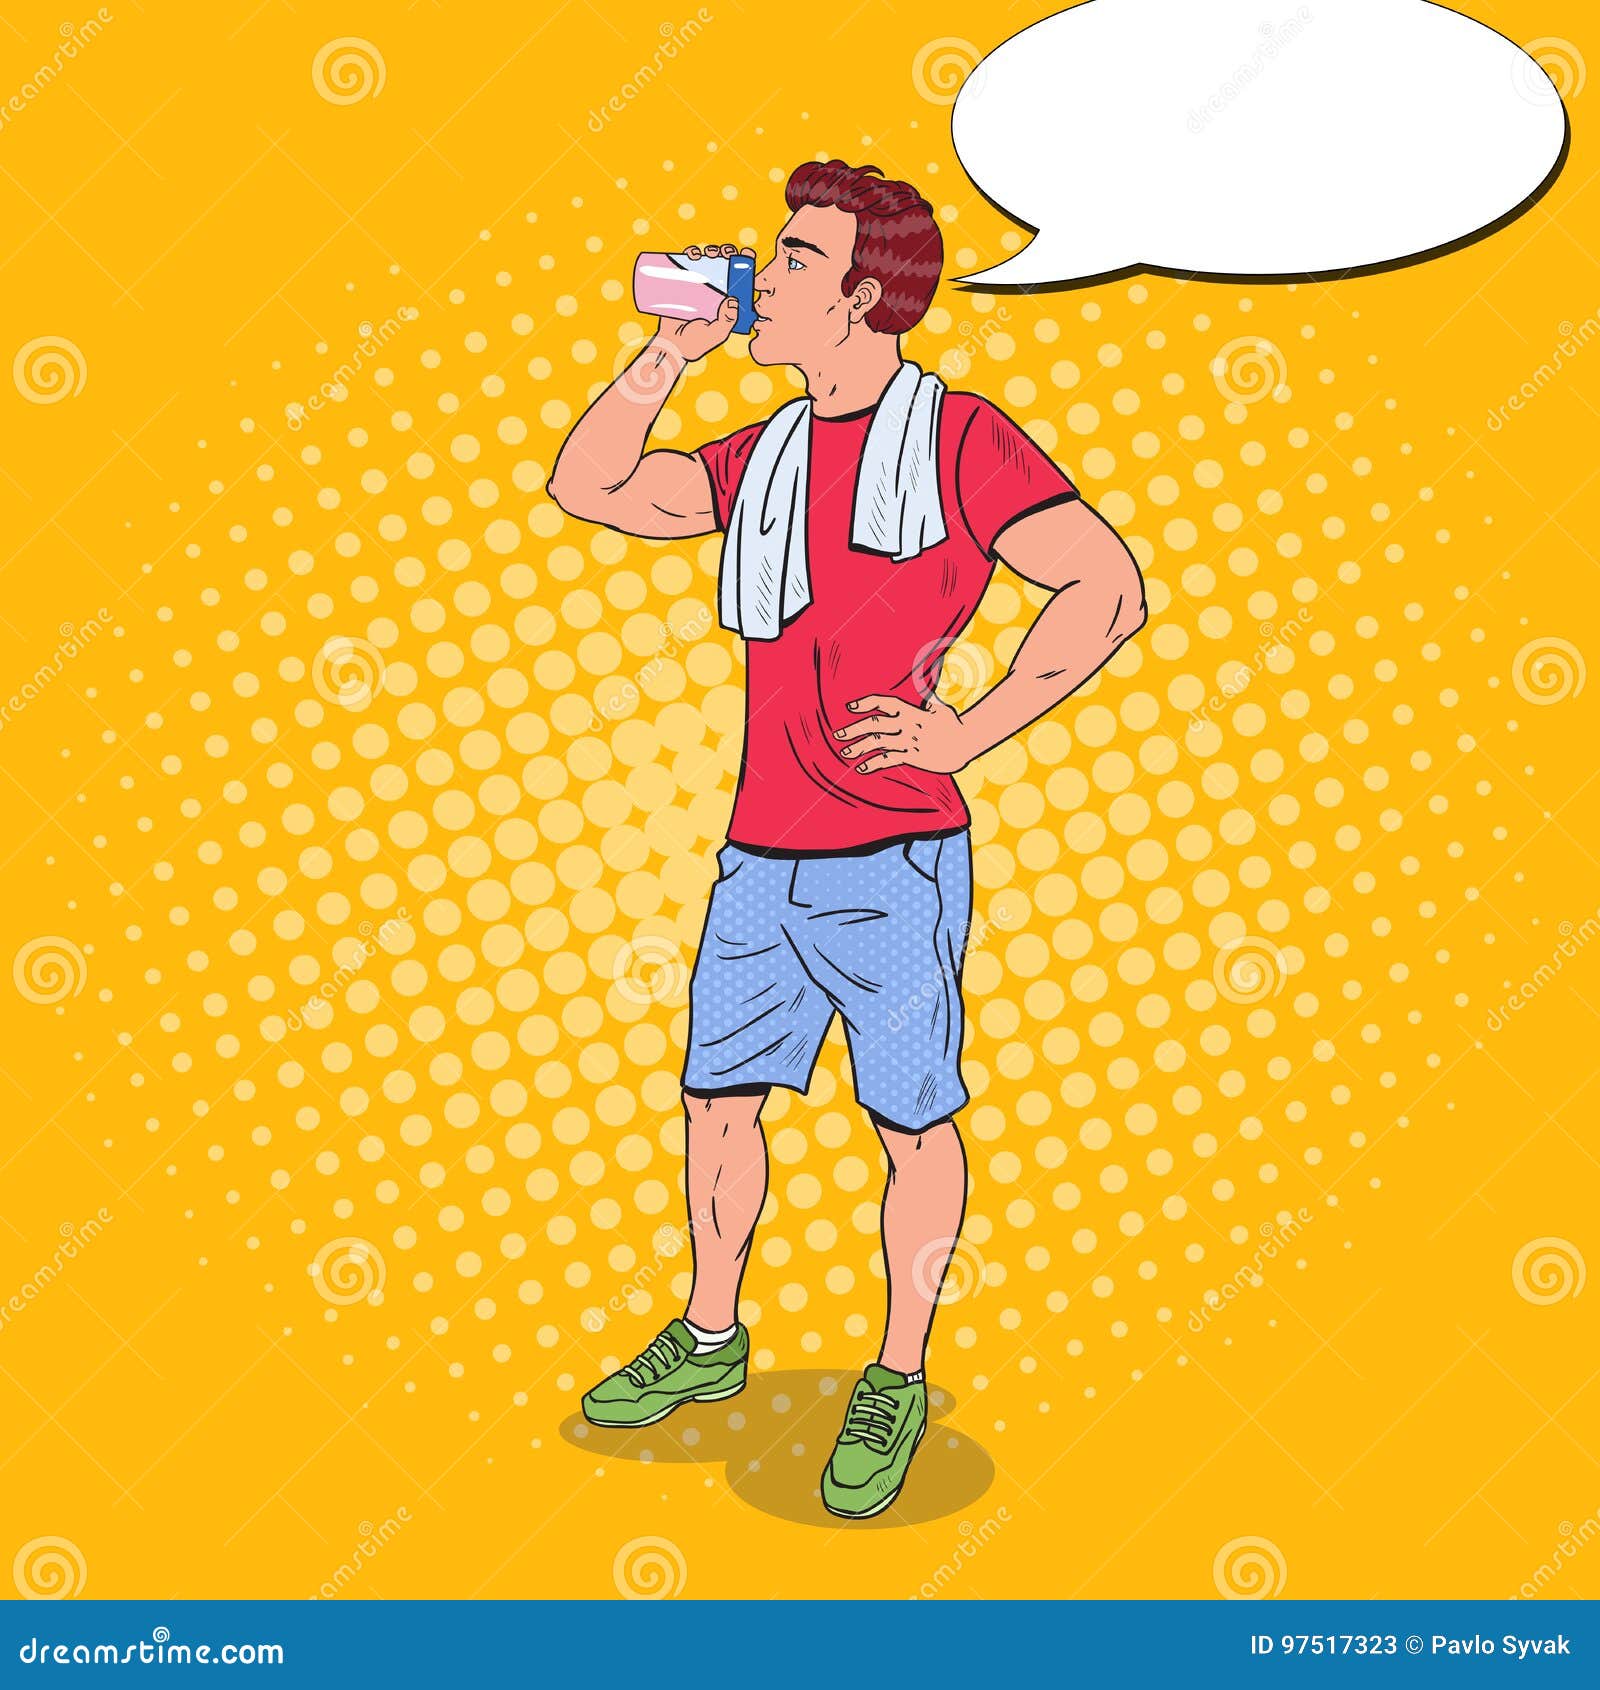 https://thumbs.dreamstime.com/z/pop-art-young-man-drinking-protein-shake-nutrition-supplements-vector-illustration-97517323.jpg